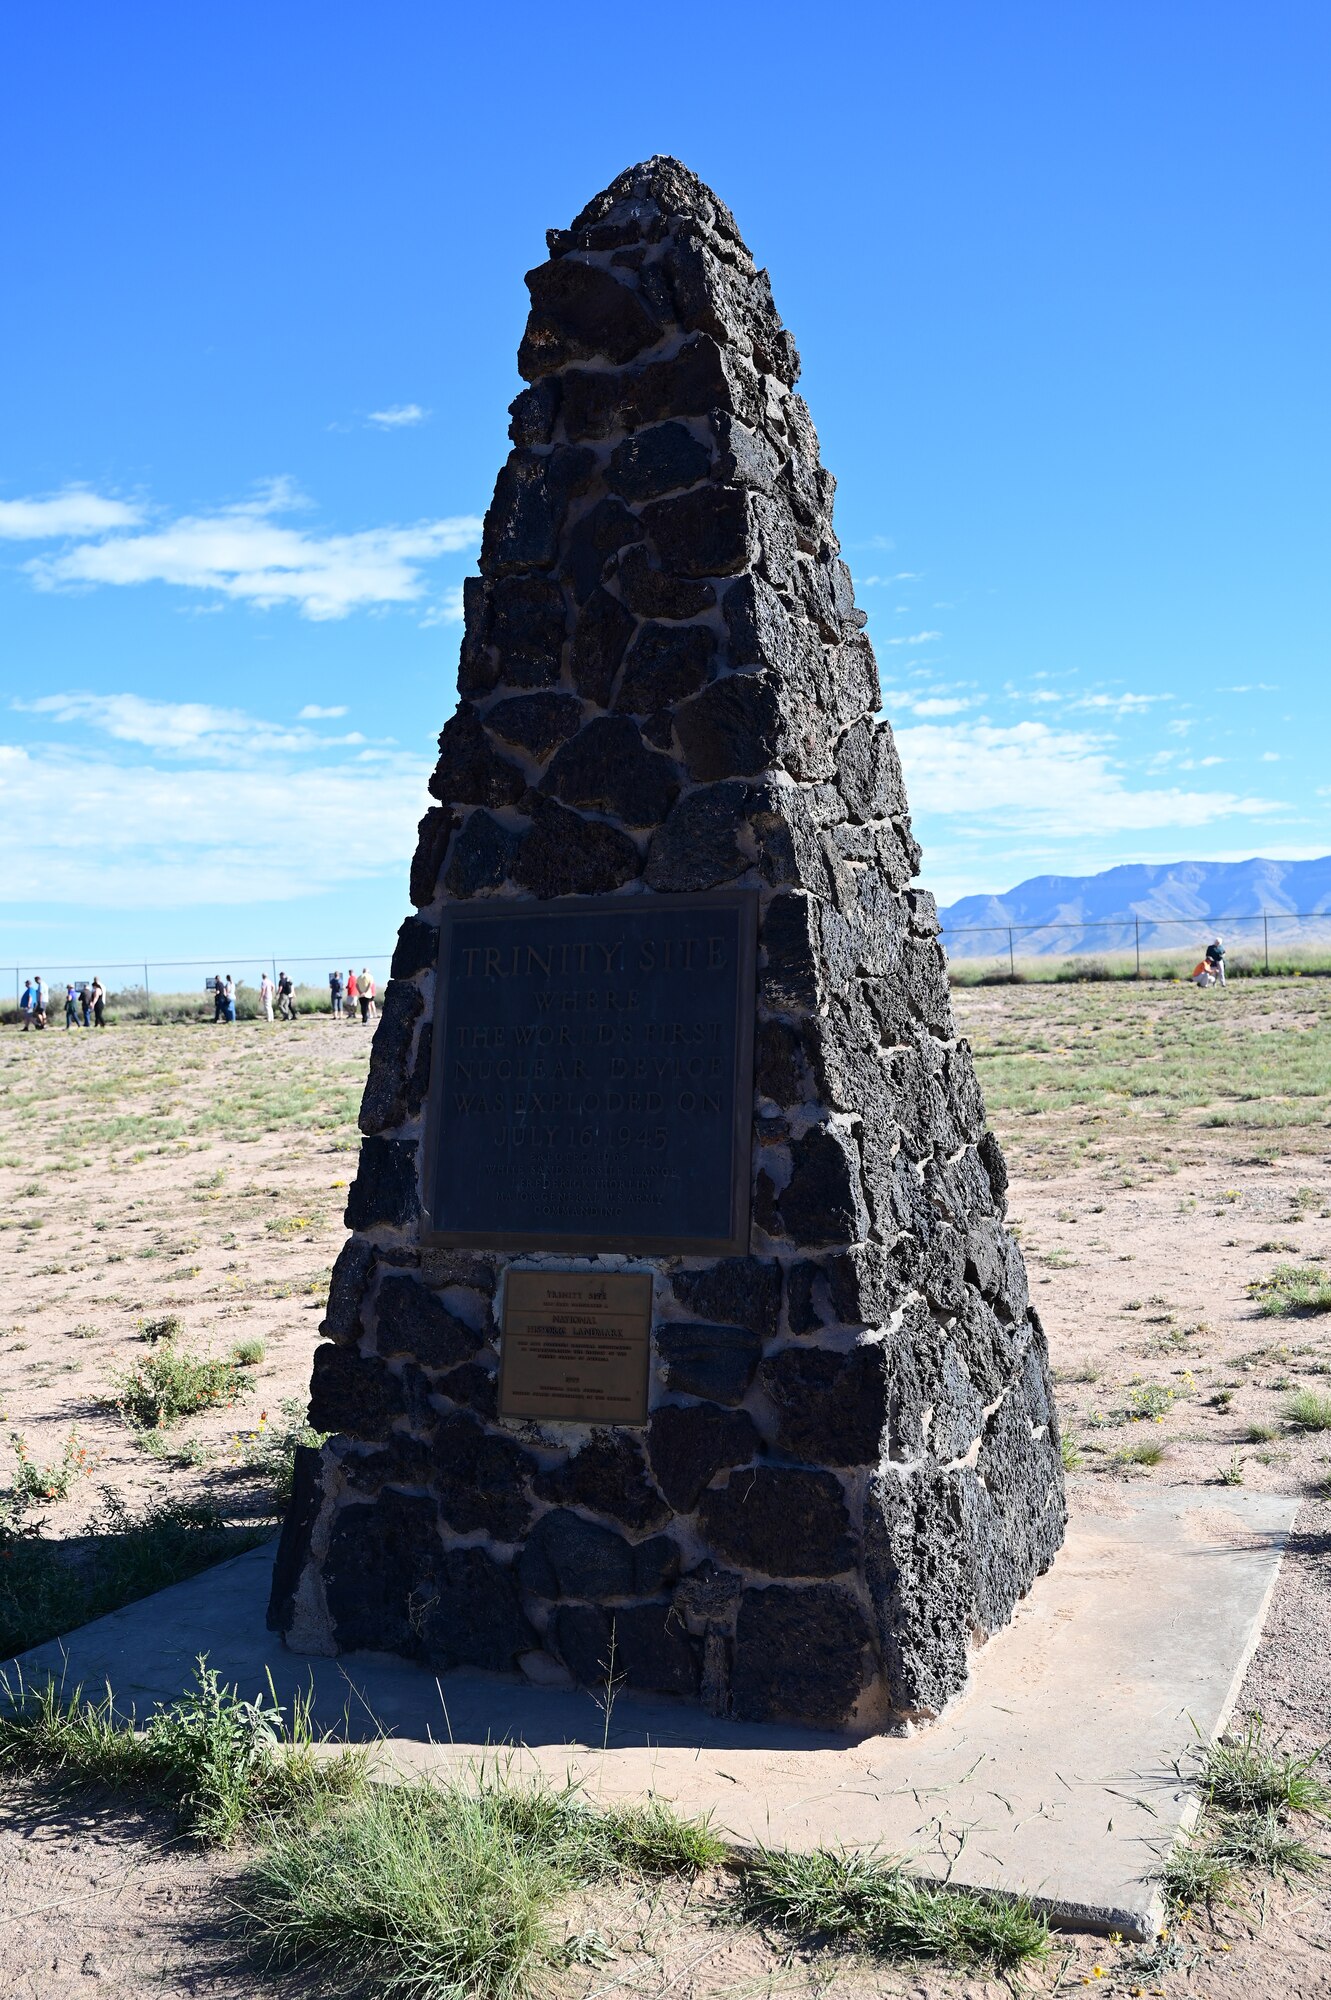 lavastone obelisk marking the site of the first nuclear detonation, named Trinity by Robert Oppenheimer and the Manhattan Project